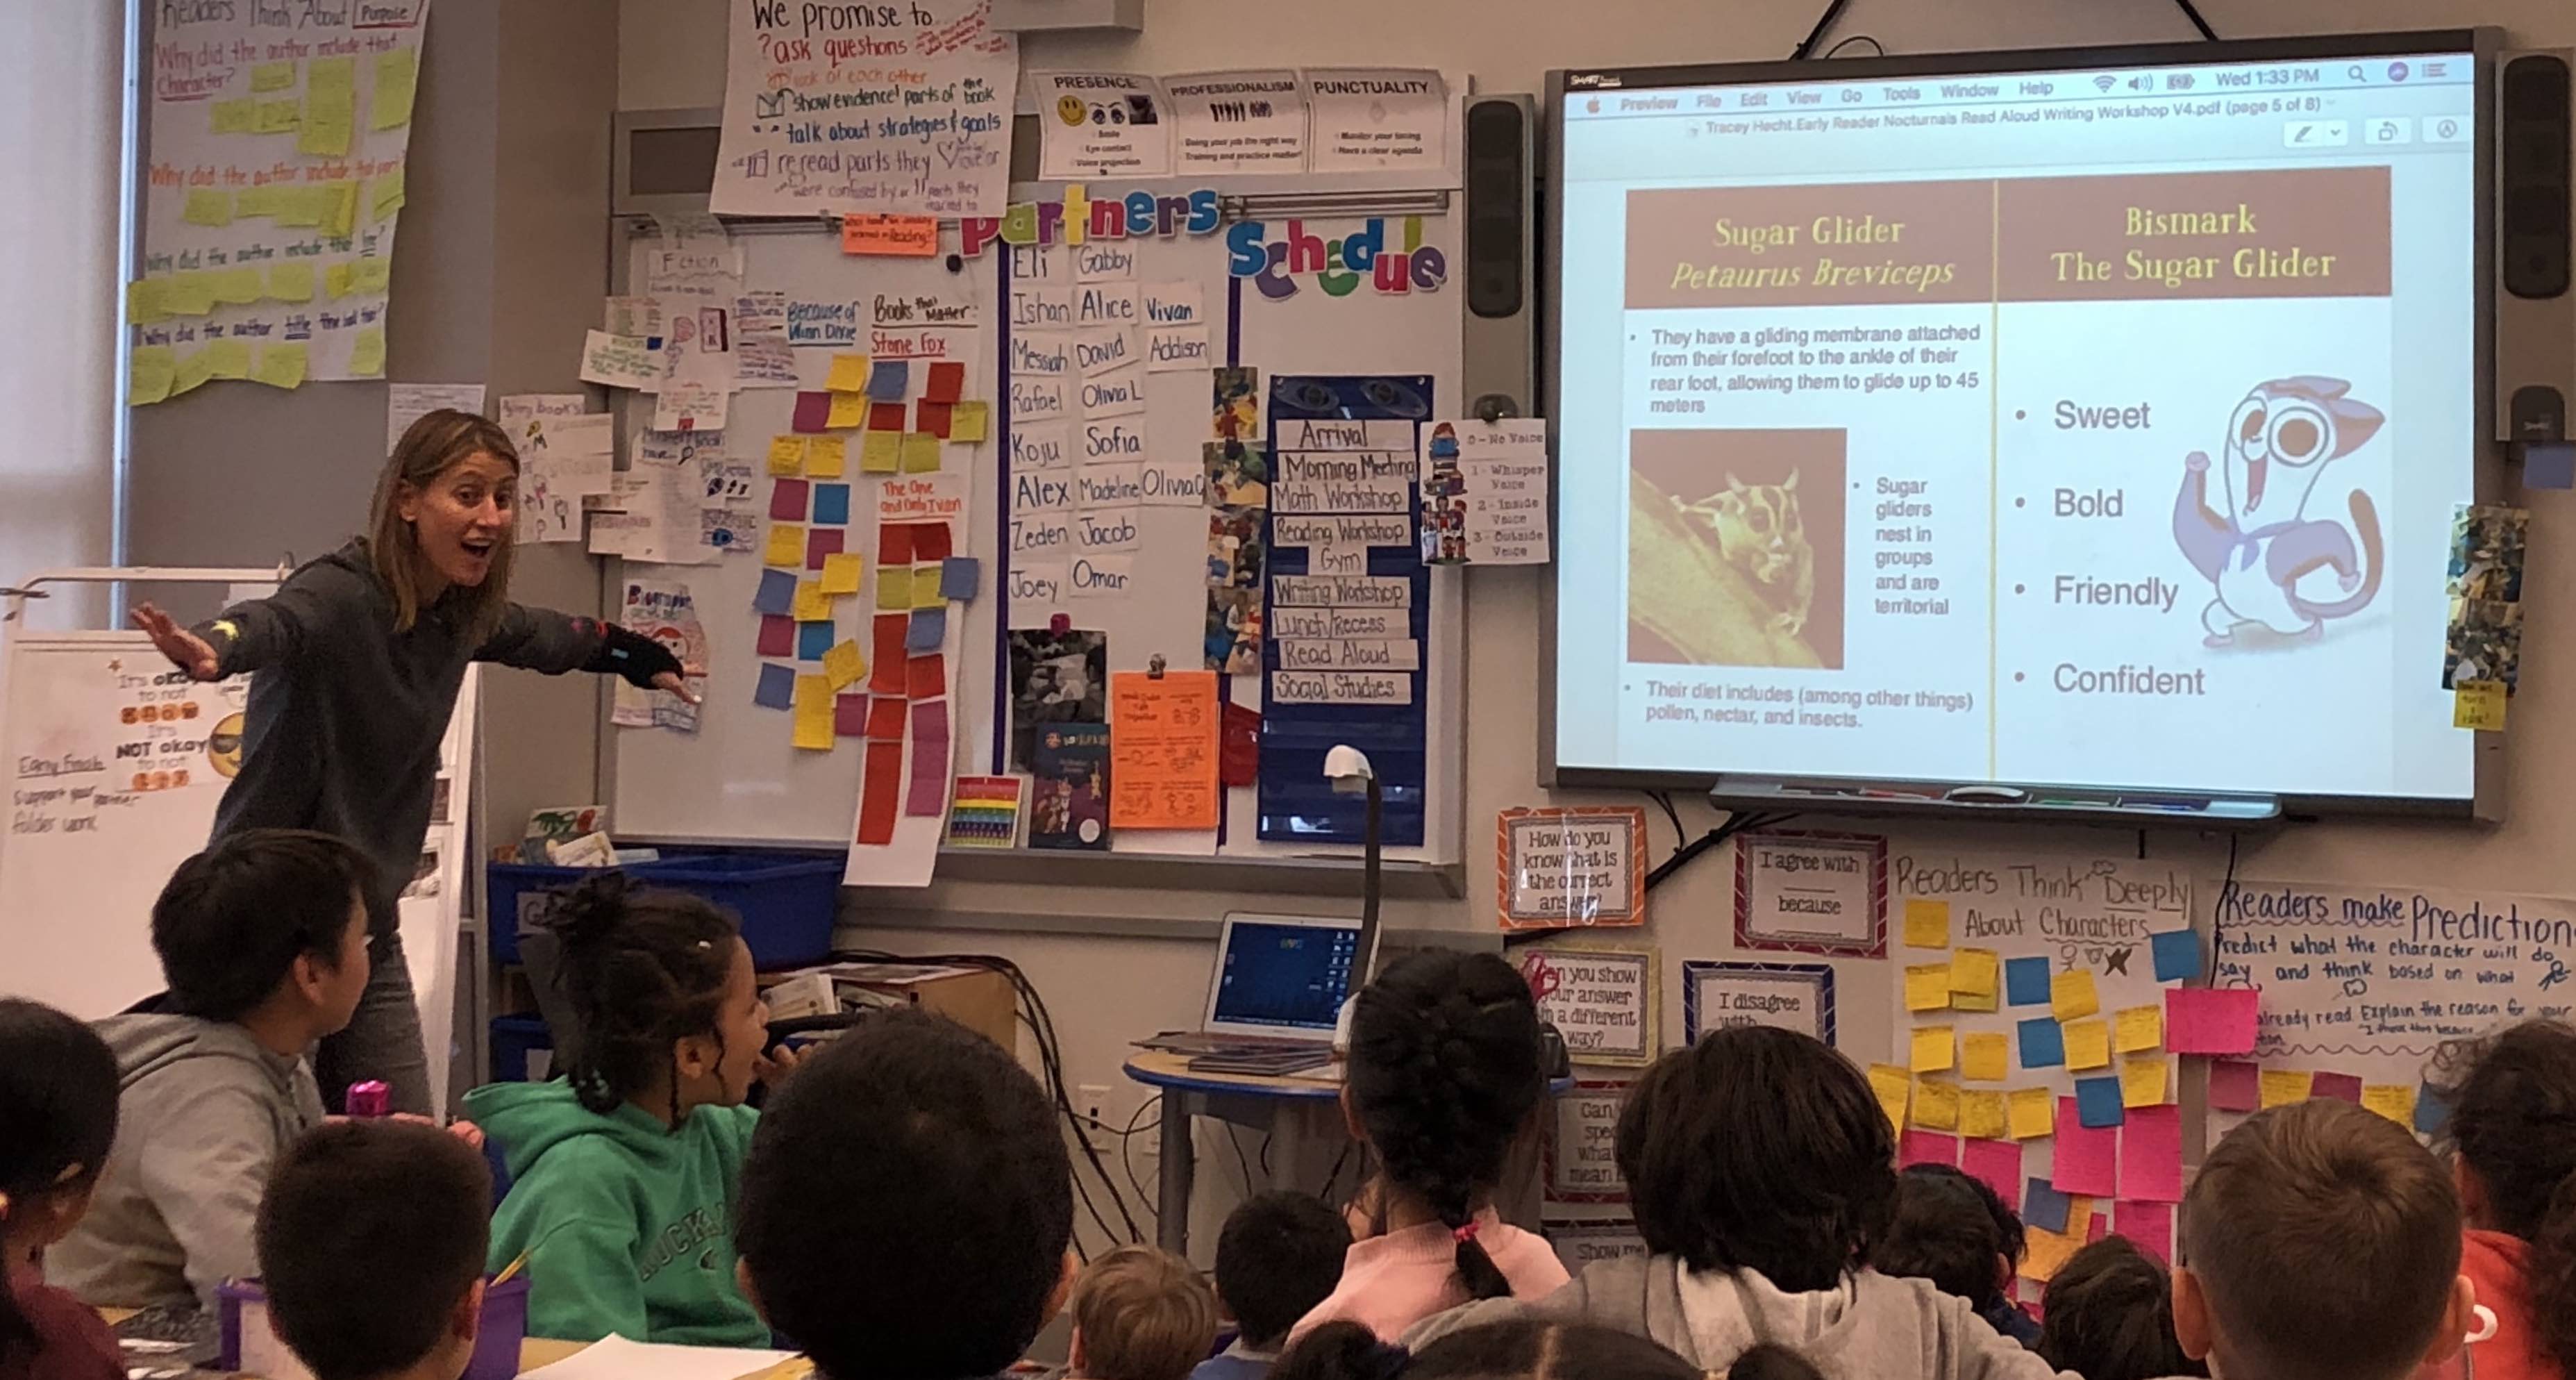 Tracey Hecht, the author of The Nocturnals, is demonstrating how sugar gliderâ€™s wings work in a classroom who is looking at sugar glider facts presented on a projector screen. 